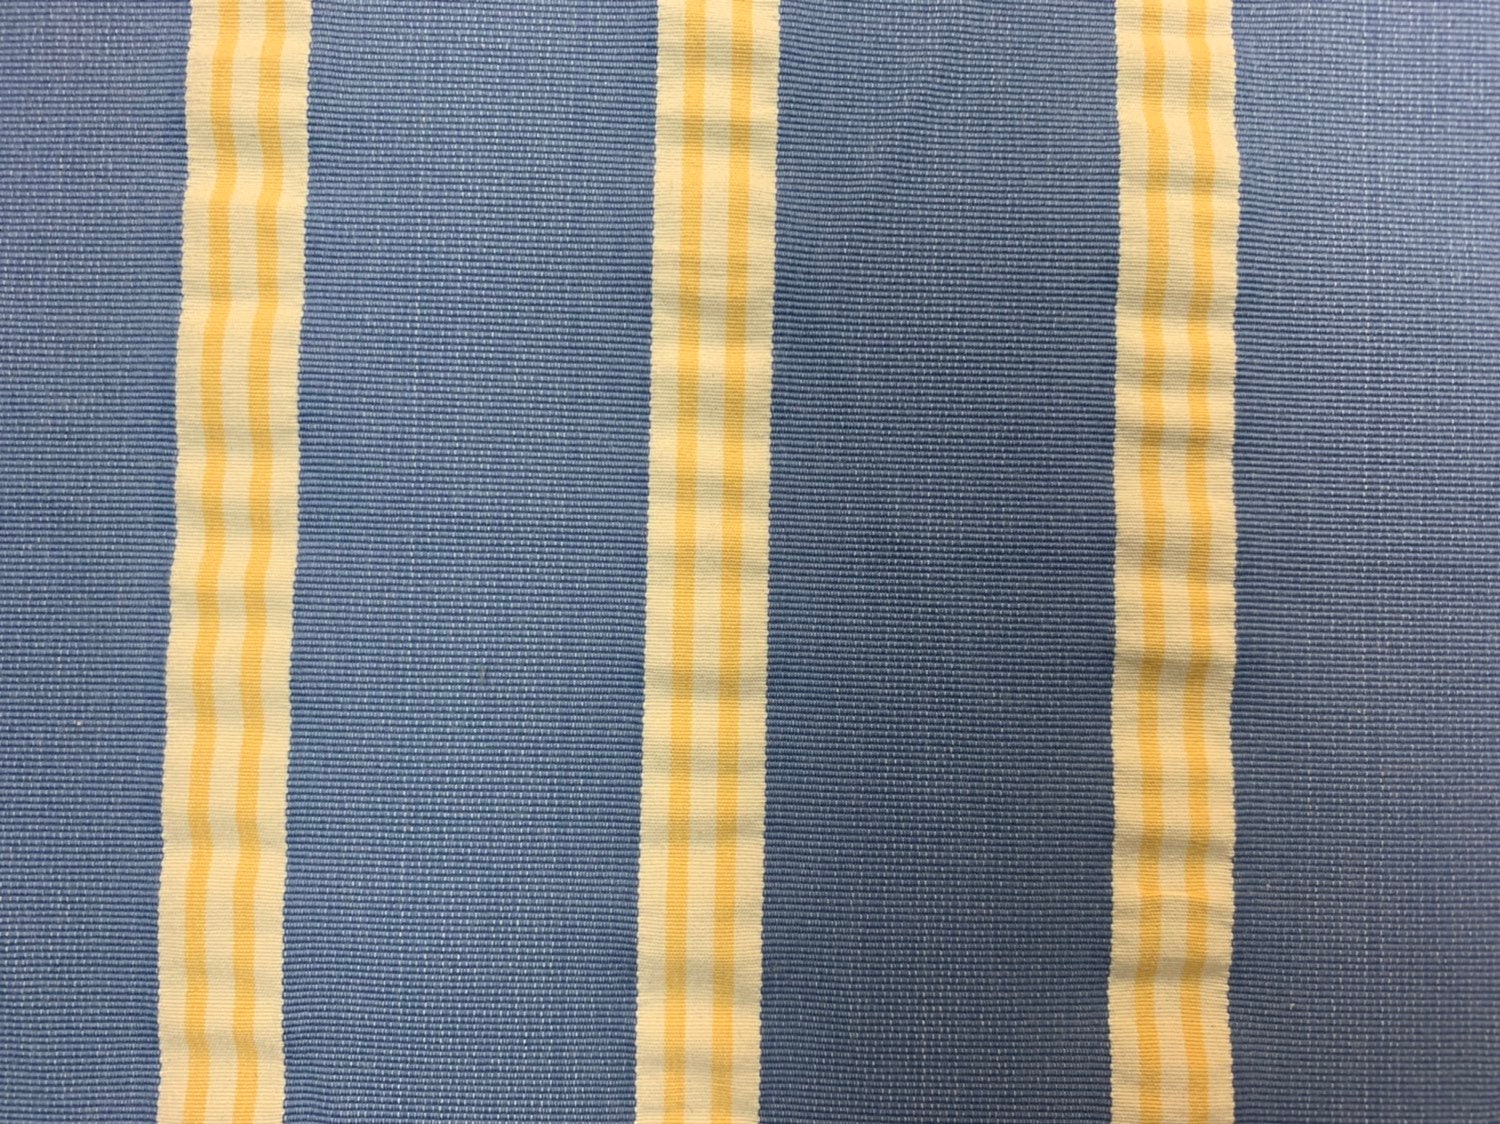 Blue and Yellow Striped Seersucker Fabric Upholstery | Etsy